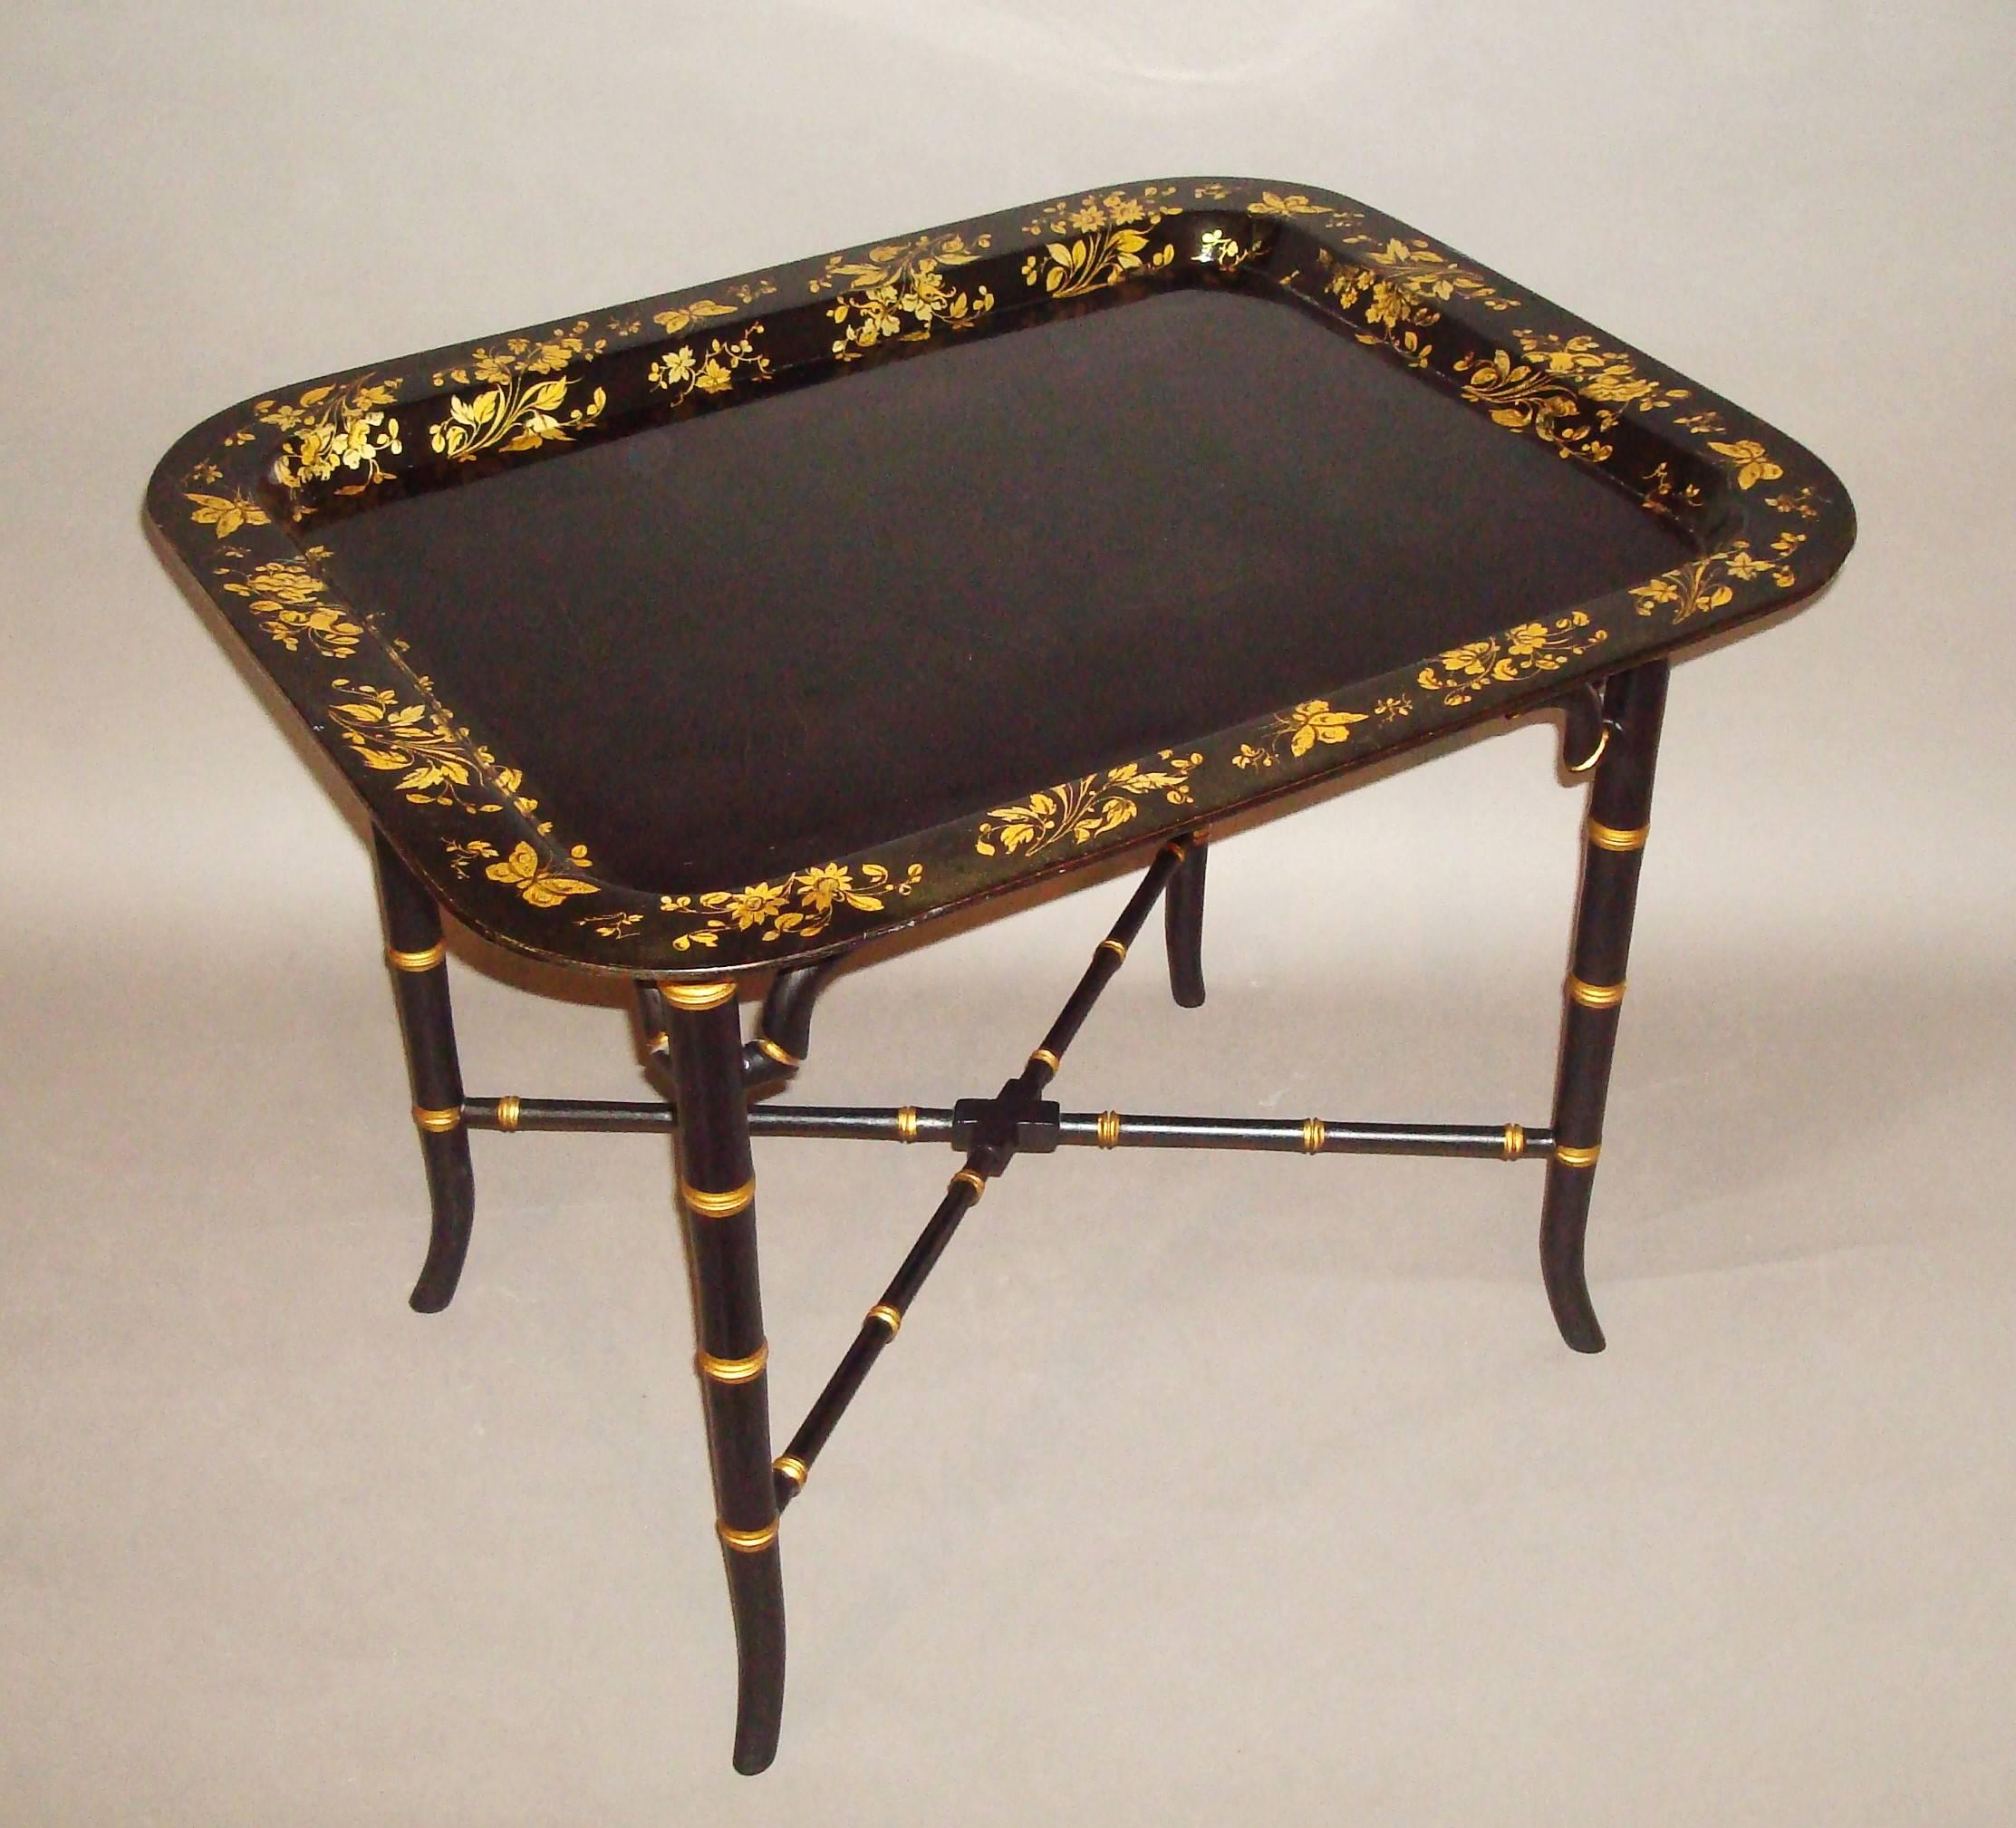 Good English Regency papier mâché tray on stand; the rectangular tray with a raised border finely decorated in gilt with floral sprays and various butterflies. The top fixed to a good quality custom-made later Stand of faux bamboo design with shaped